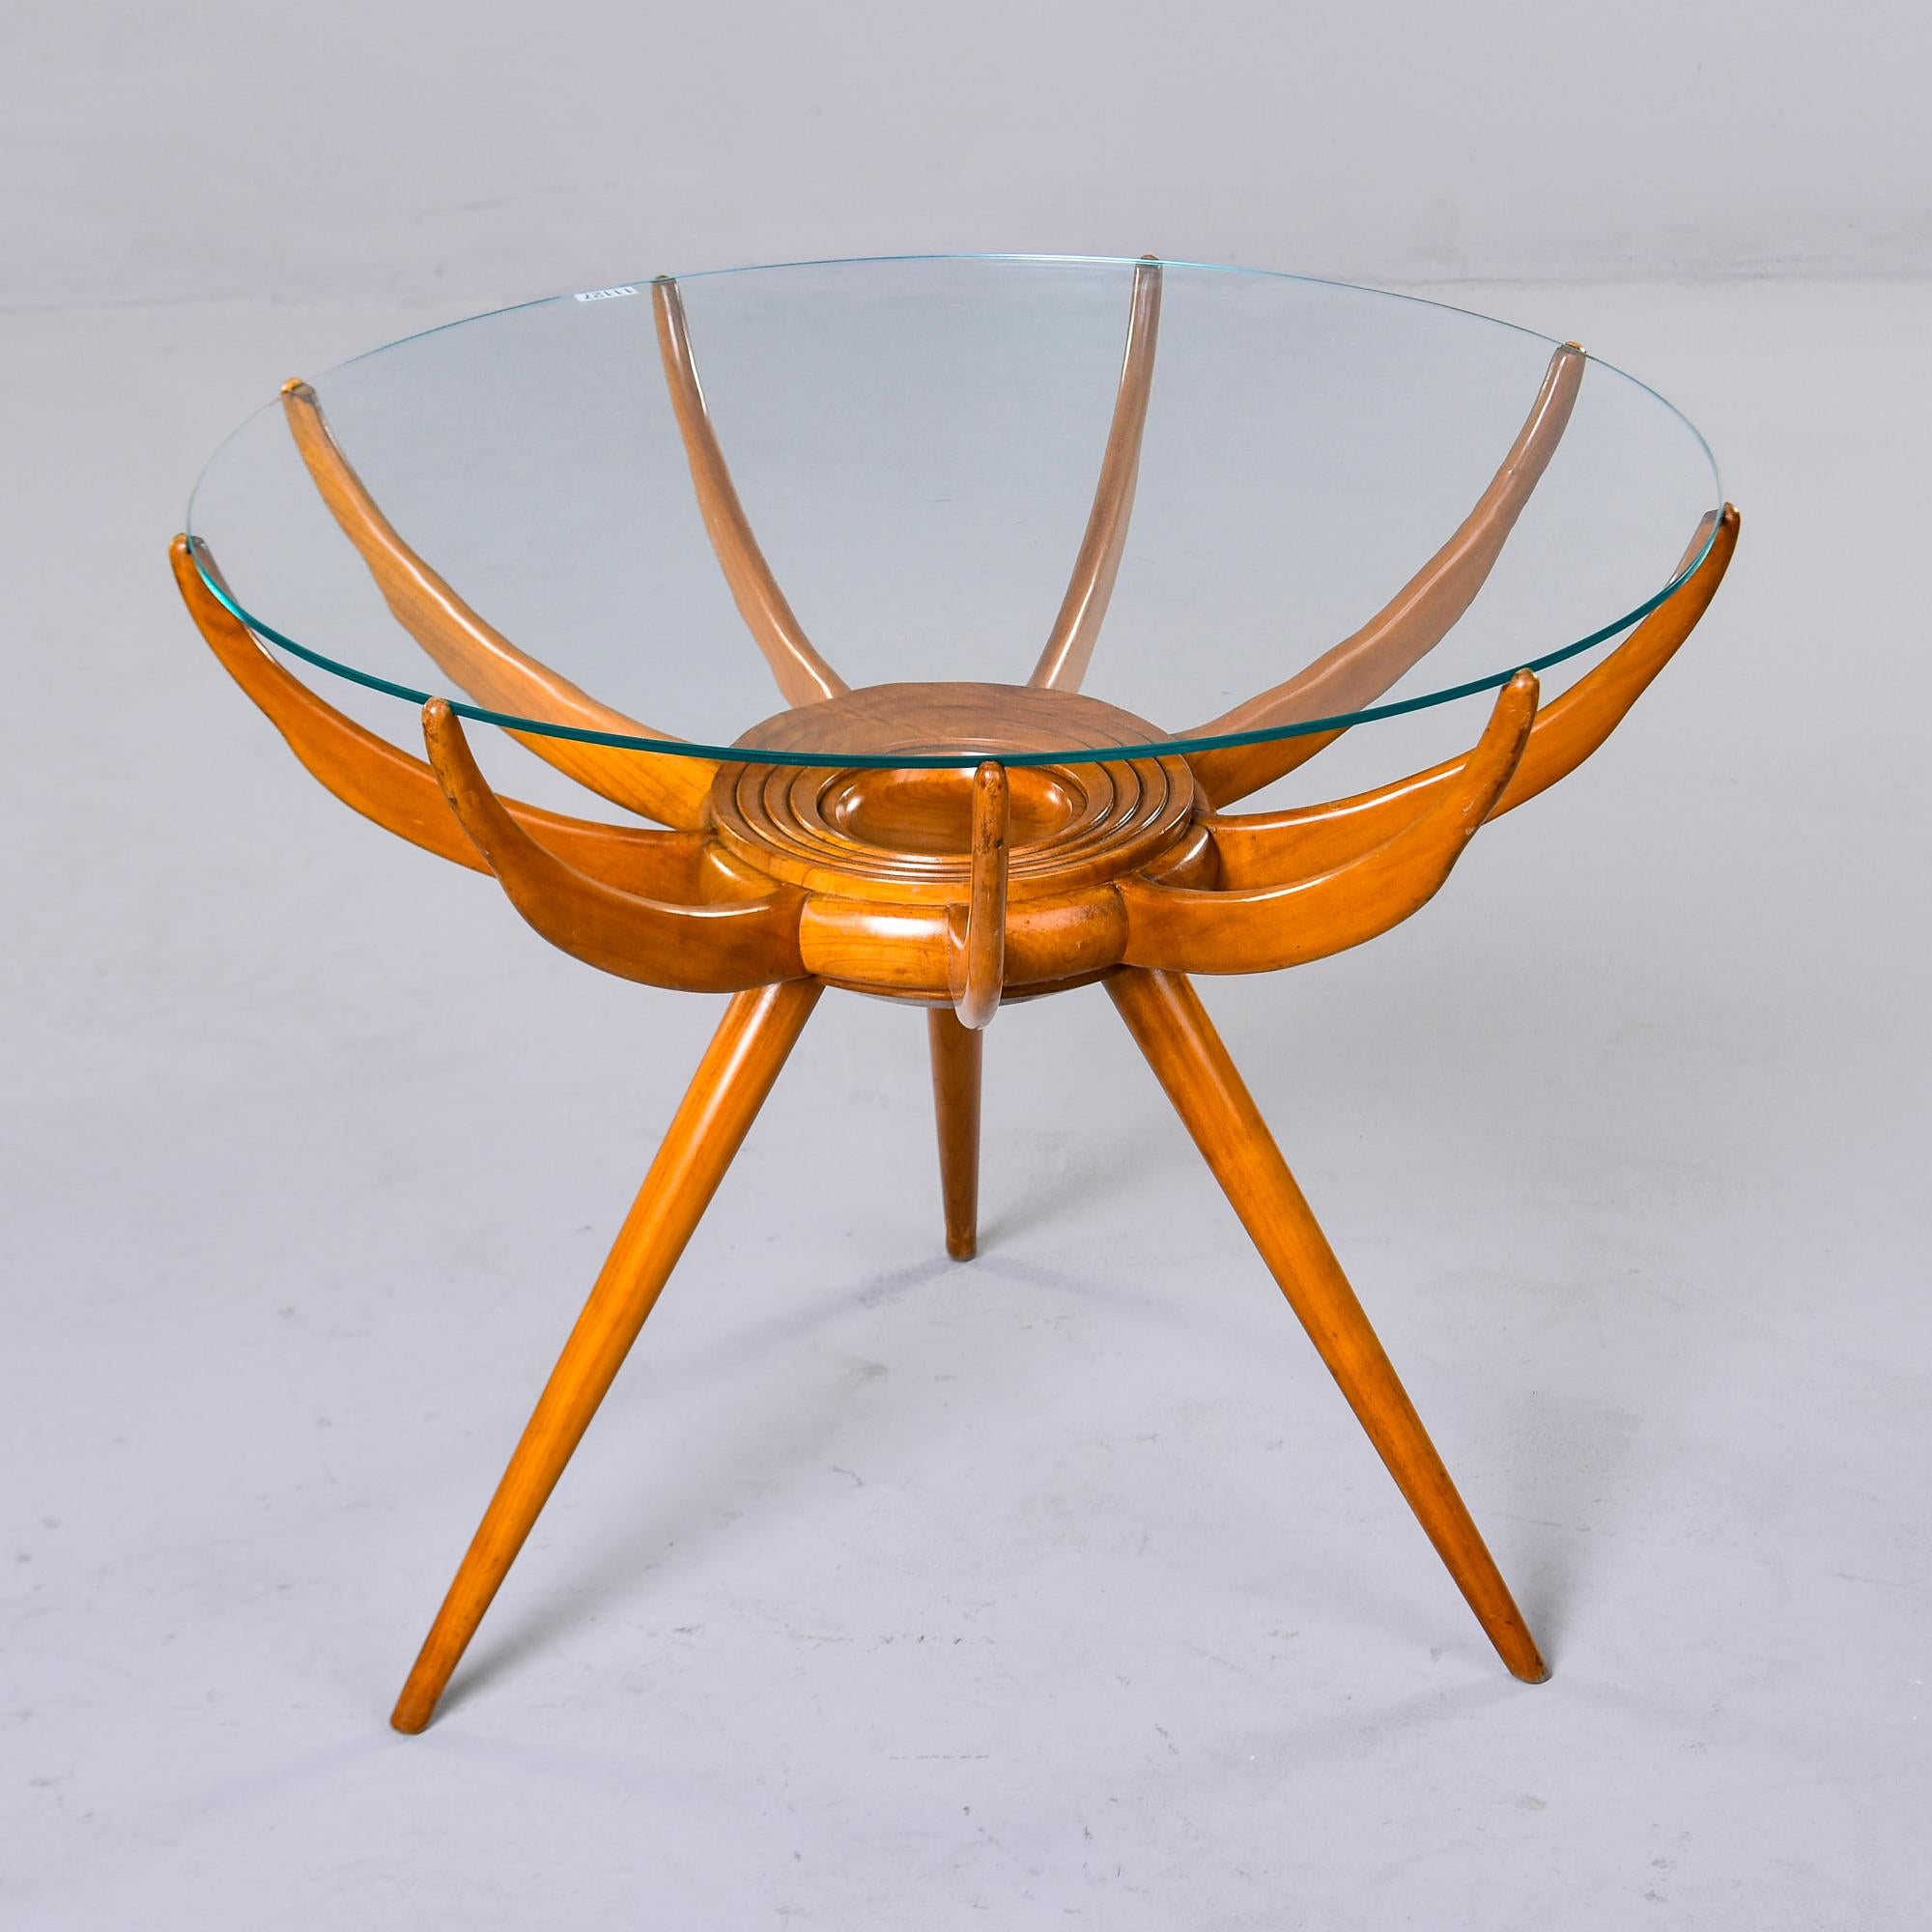 Iconic wood and glass spider leg side, coffee or cocktail table designed by Carlo De Carli. Made in Italy in the late 1950s. Base has three tapered legs. Round glass top is supported by nine curved and tapered arms that are notched on the ends for